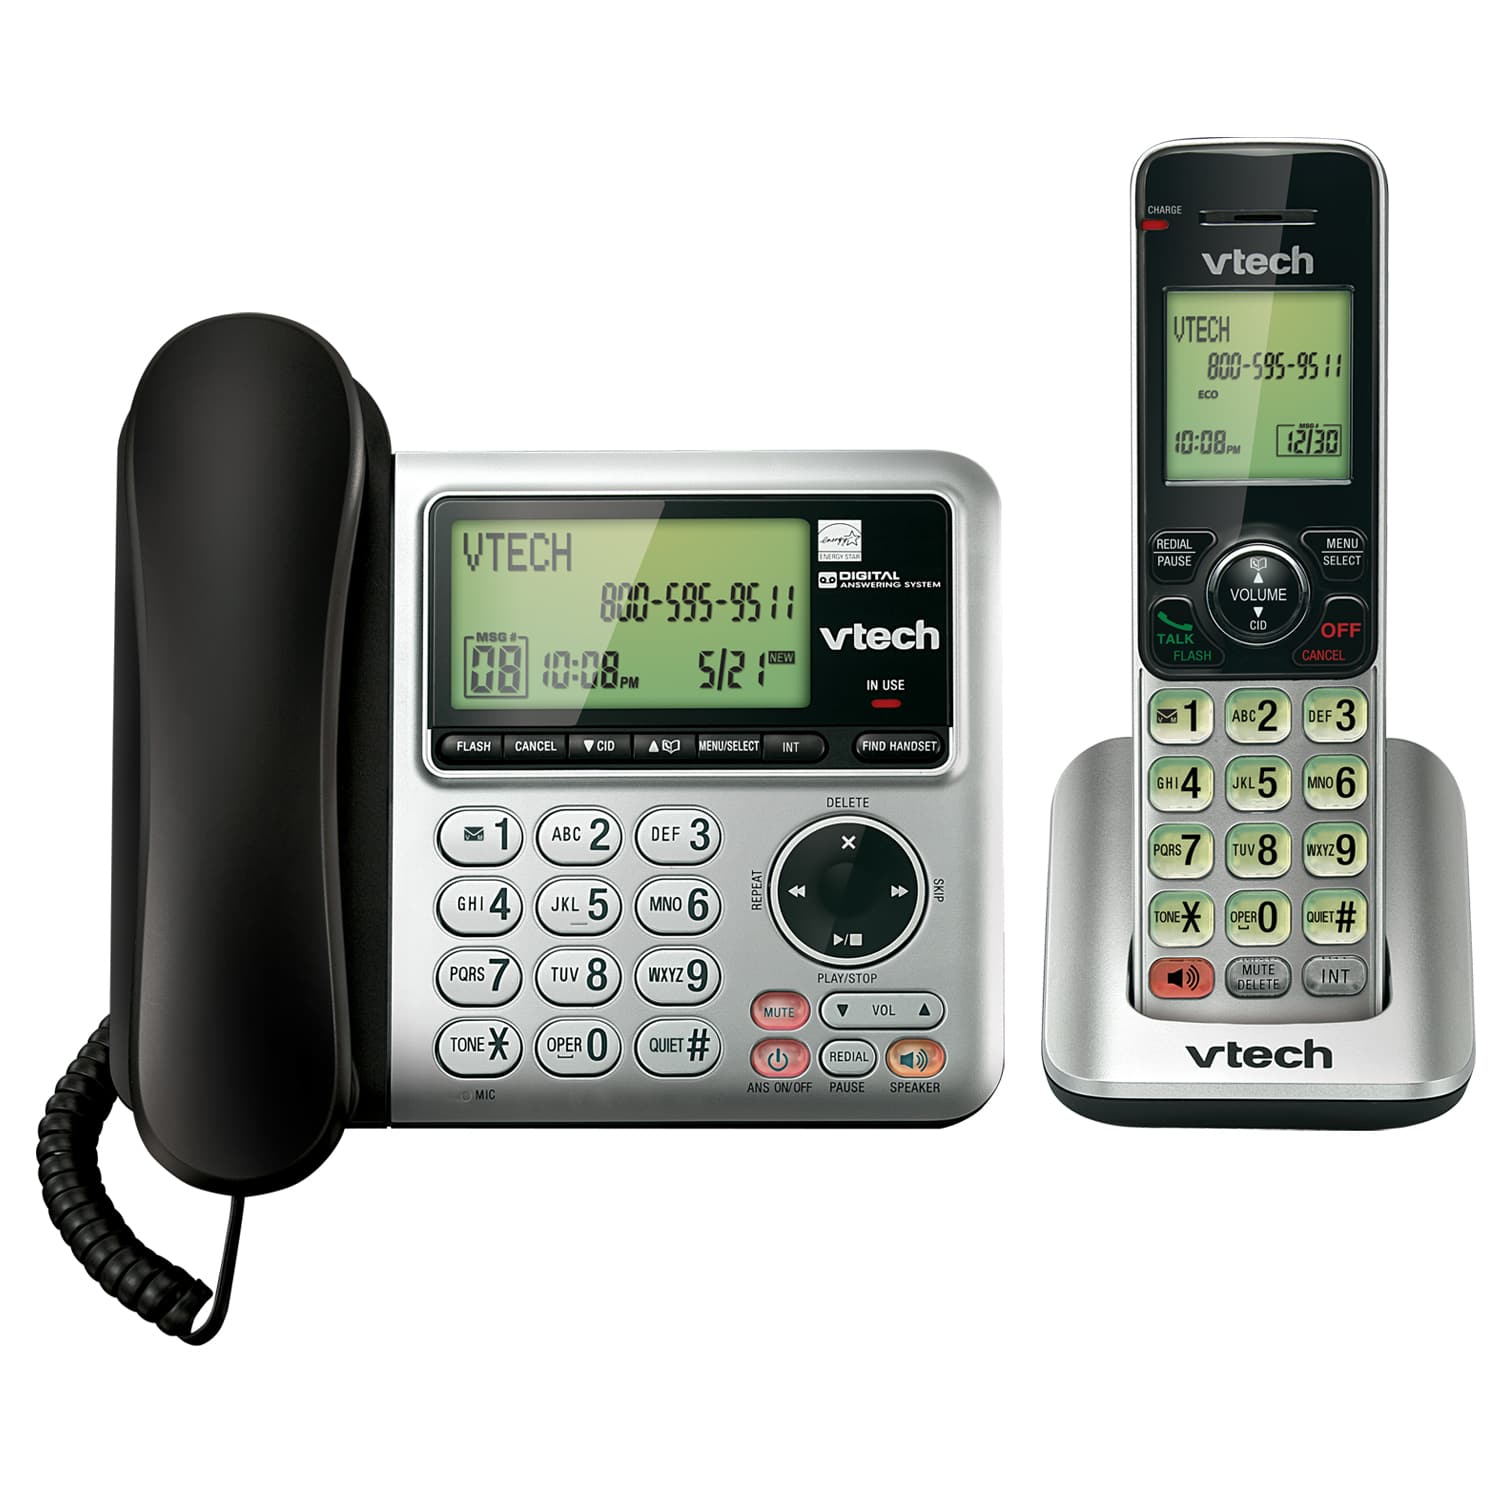 Corded/Cordless Answering System with Caller ID/Call Waiting